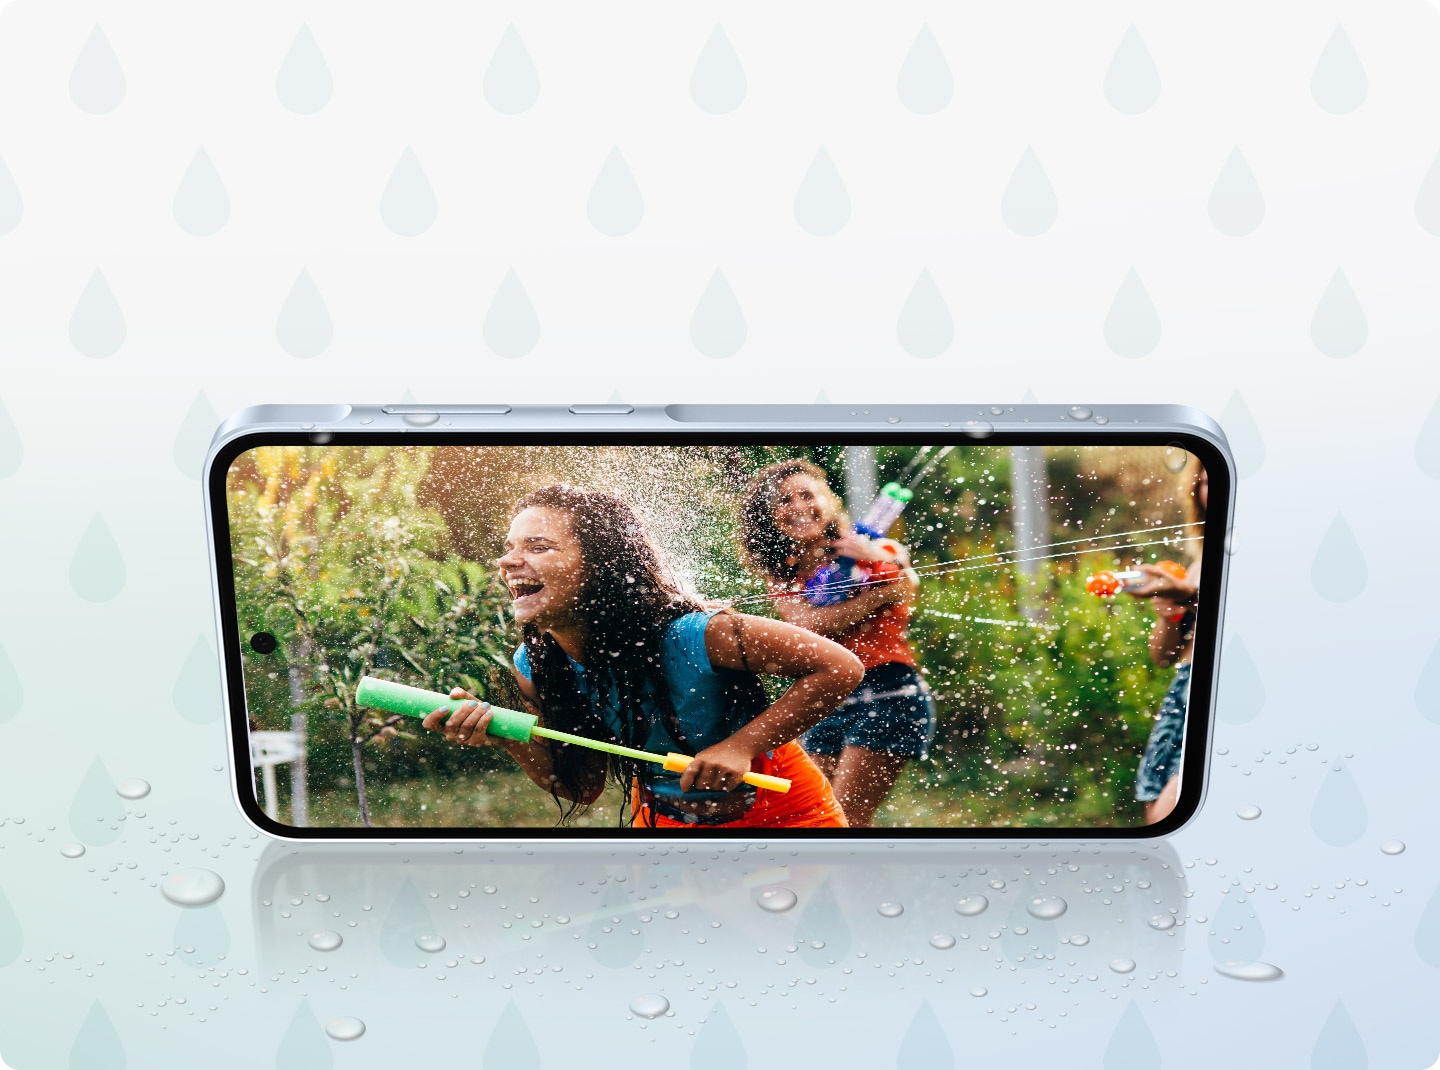 A smartphone in landscape mode displaying an image of two girls enjoying a water fight. There are water droplets around.